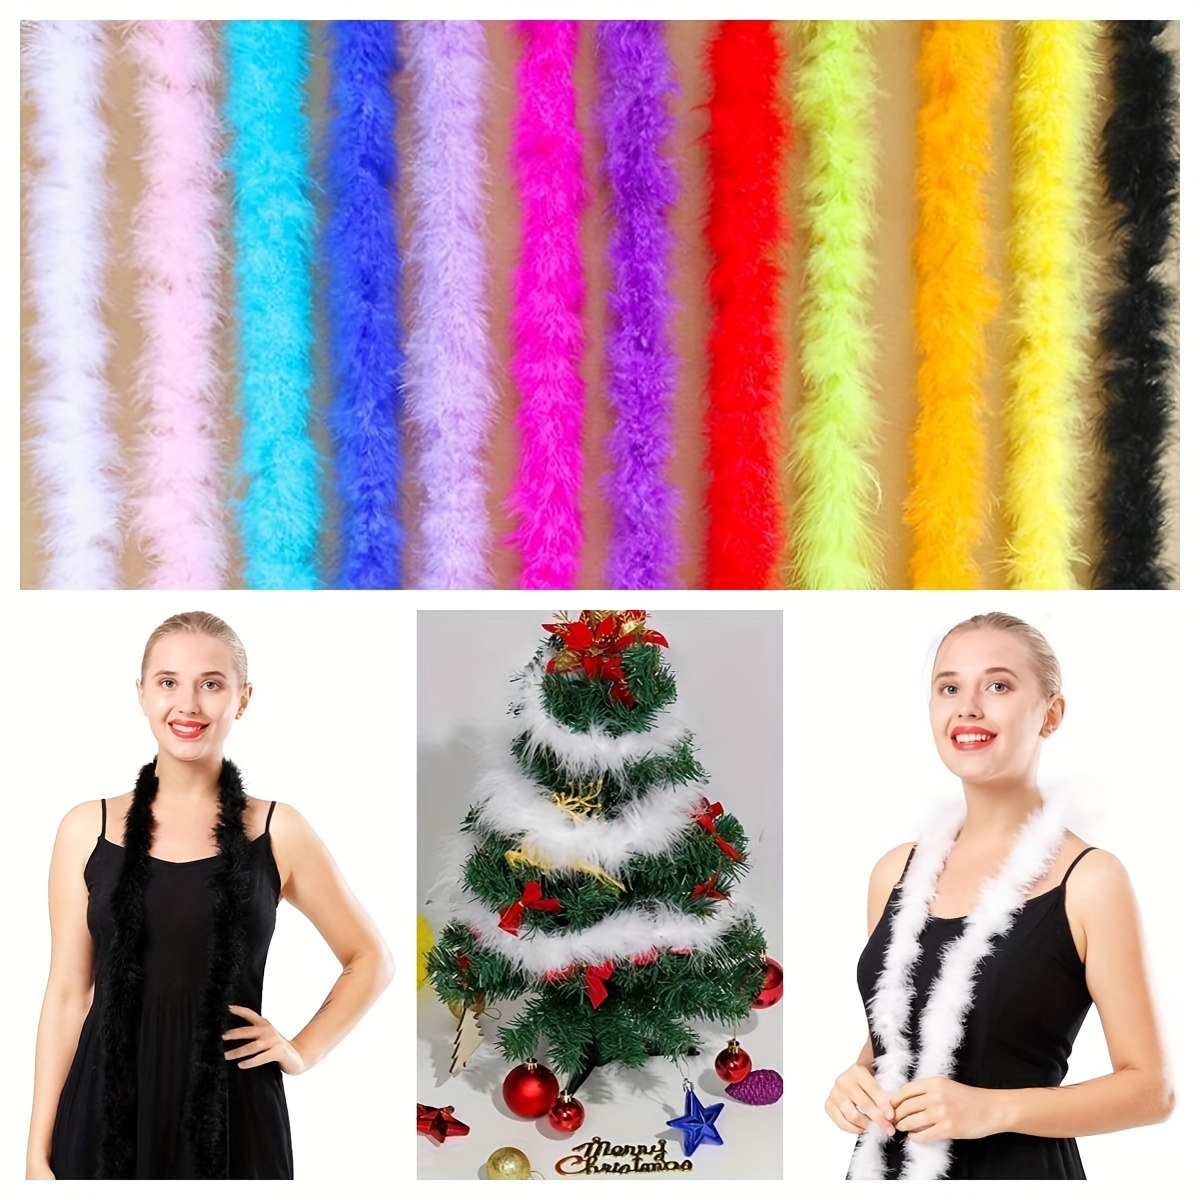 Wholesale Colorful Chandelle Feather Strip Turkey Feather Boa for Crafts  Clothing Dress Accessories Sewing Supplies and Fabric - AliExpress